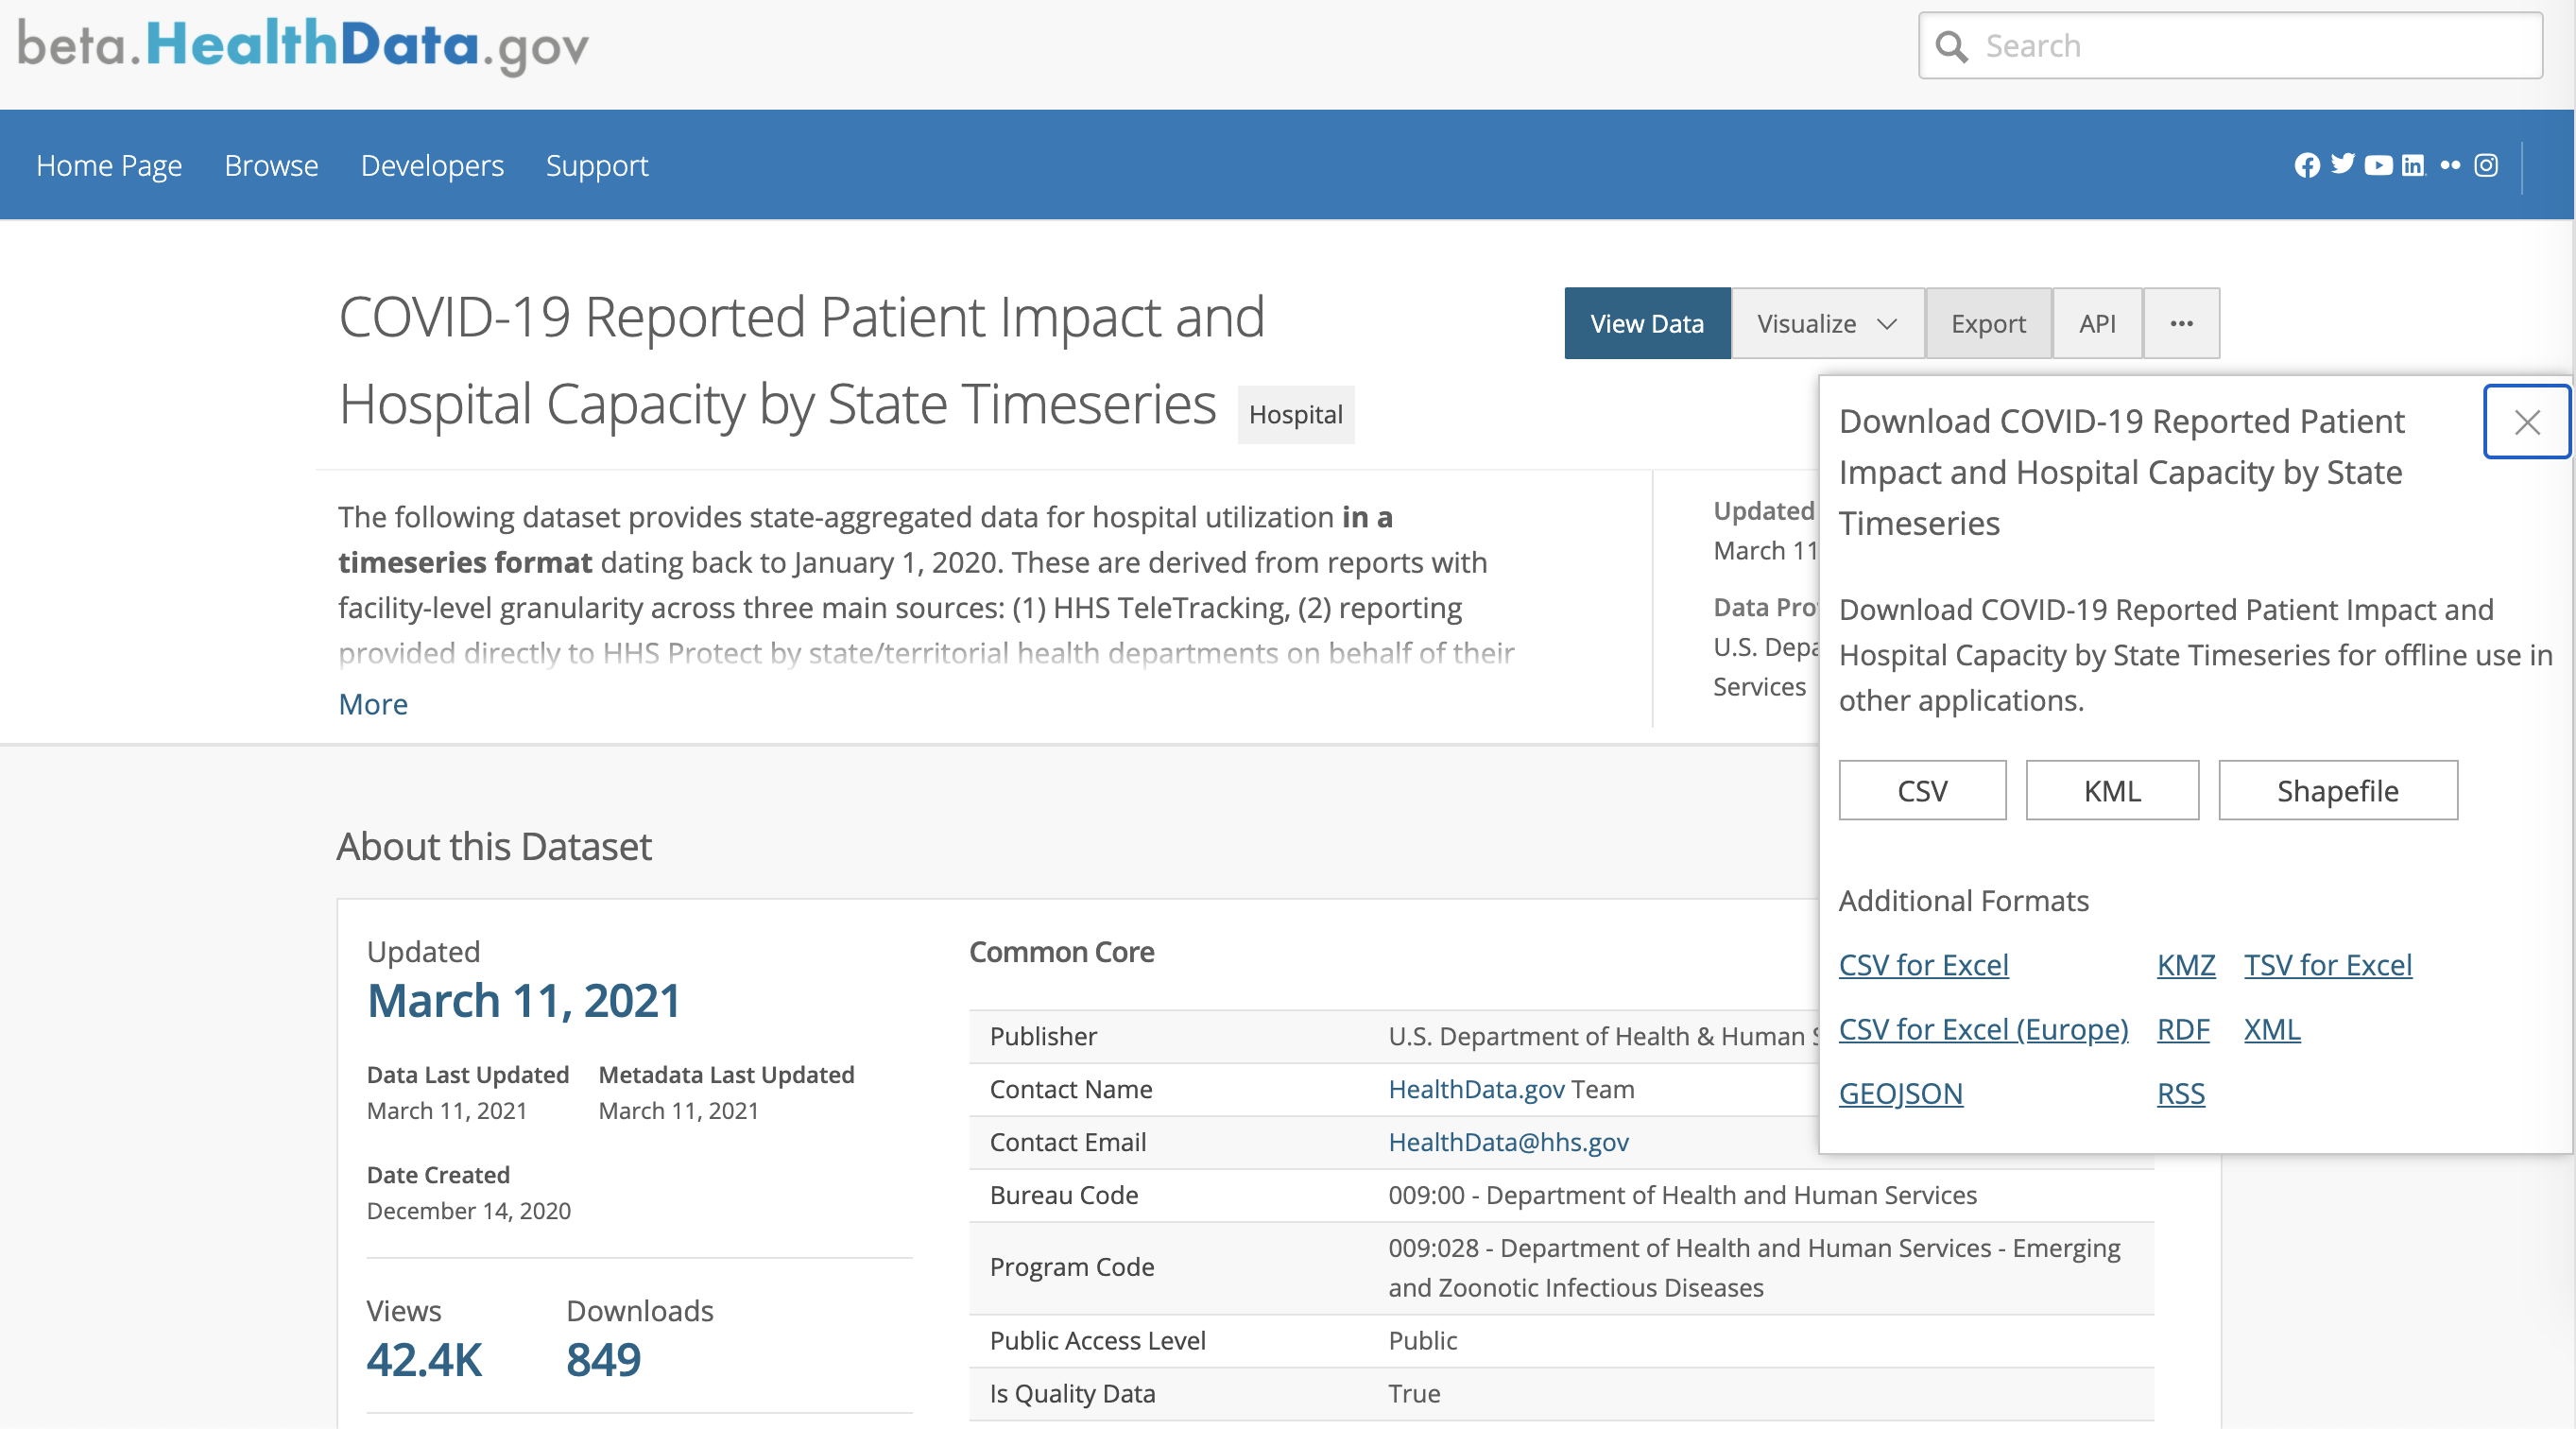 Screenshot of HHS state-level hospitalization timeseries dataset hosted at https://beta.healthdata.gov/Hospital/COVID-19-Reported-Patient-Impact-and-Hospital-Capa/g62h-syeh